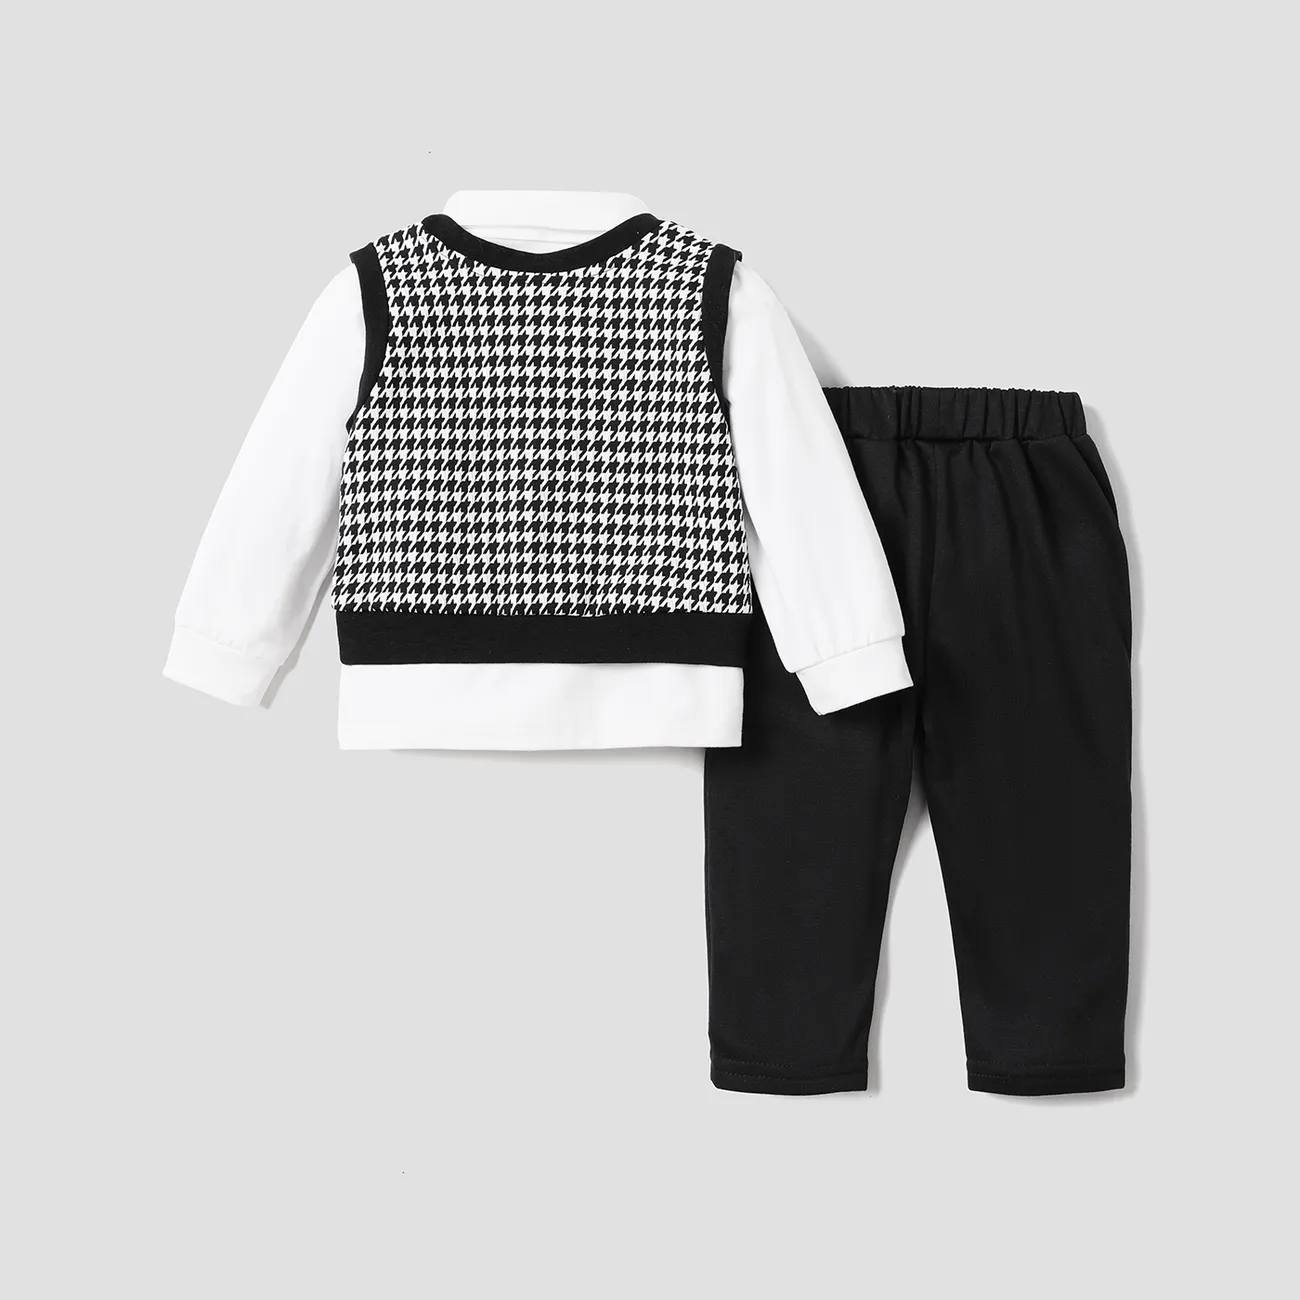 3-Pack Baby Boy Houndstooth Vest and Solid Long-sleeve Shirt with Pants Set BlackandWhite big image 1